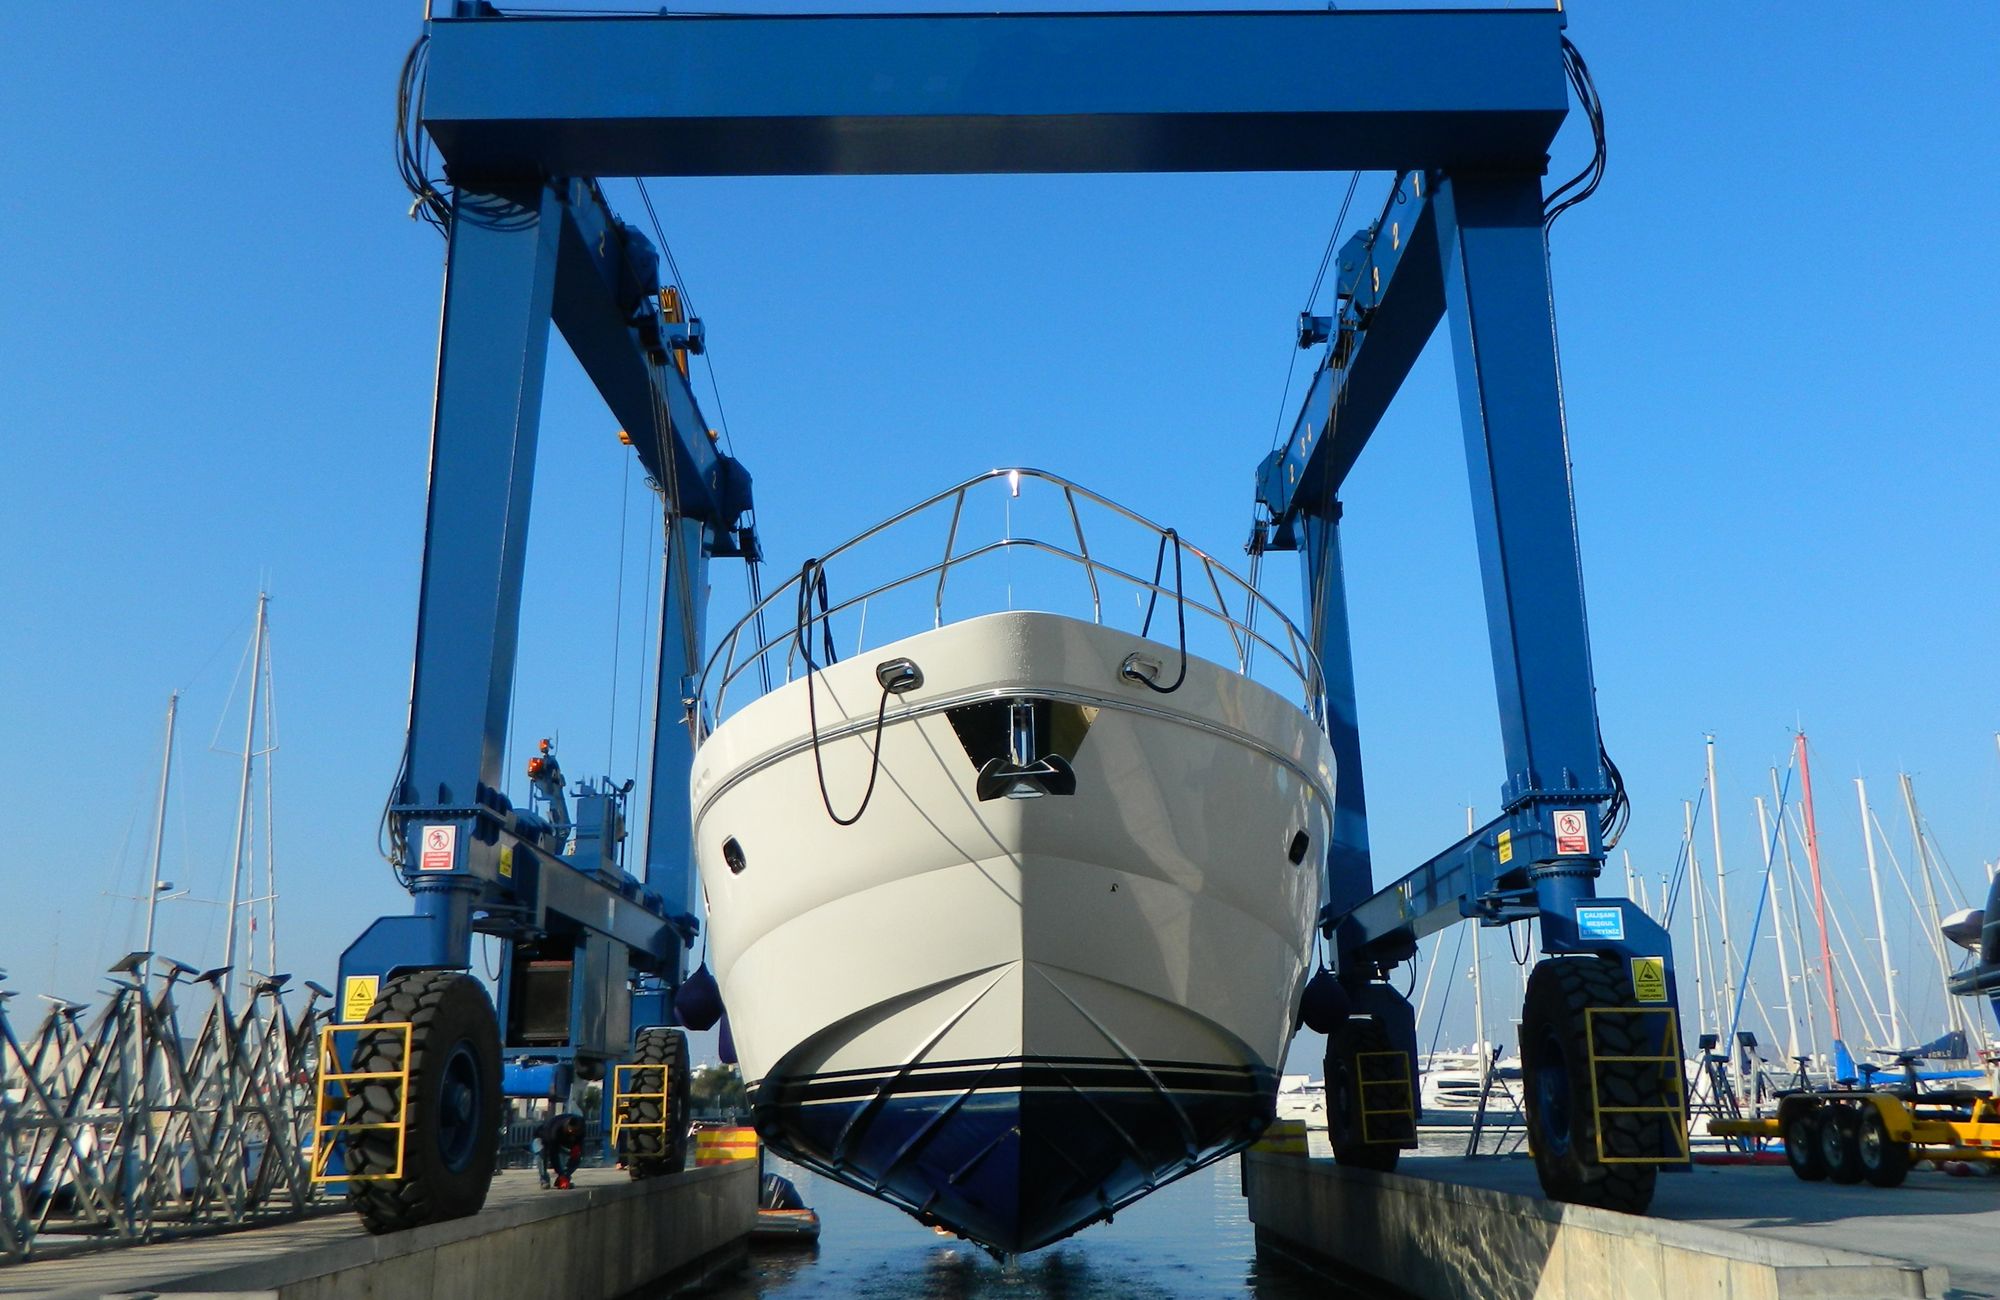 Evolving Customer Expectations: Meeting Changing Demands in Boat Design